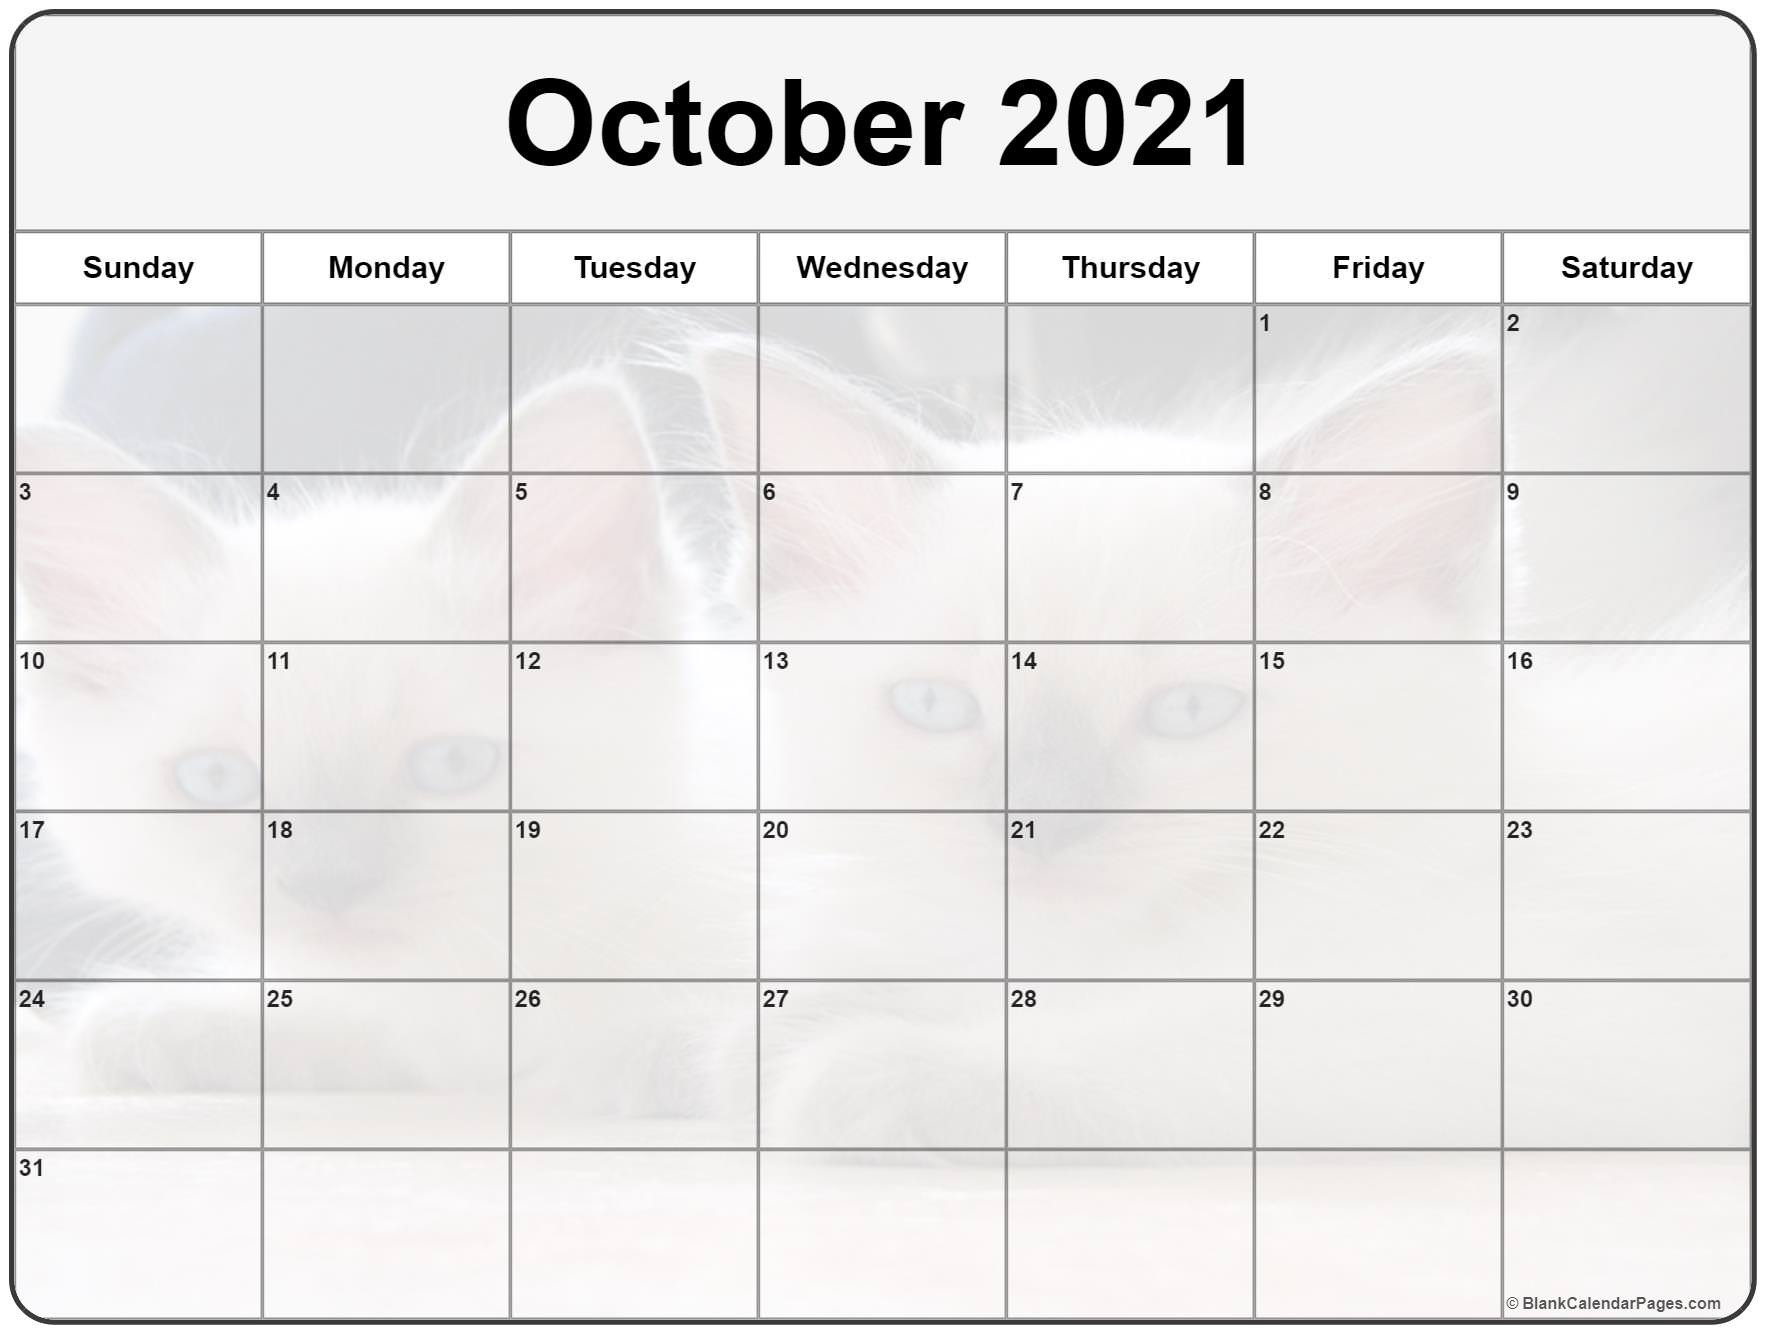 Collection Of October 2021 Photo Calendars With Image Filters.-Calendar 2021 October